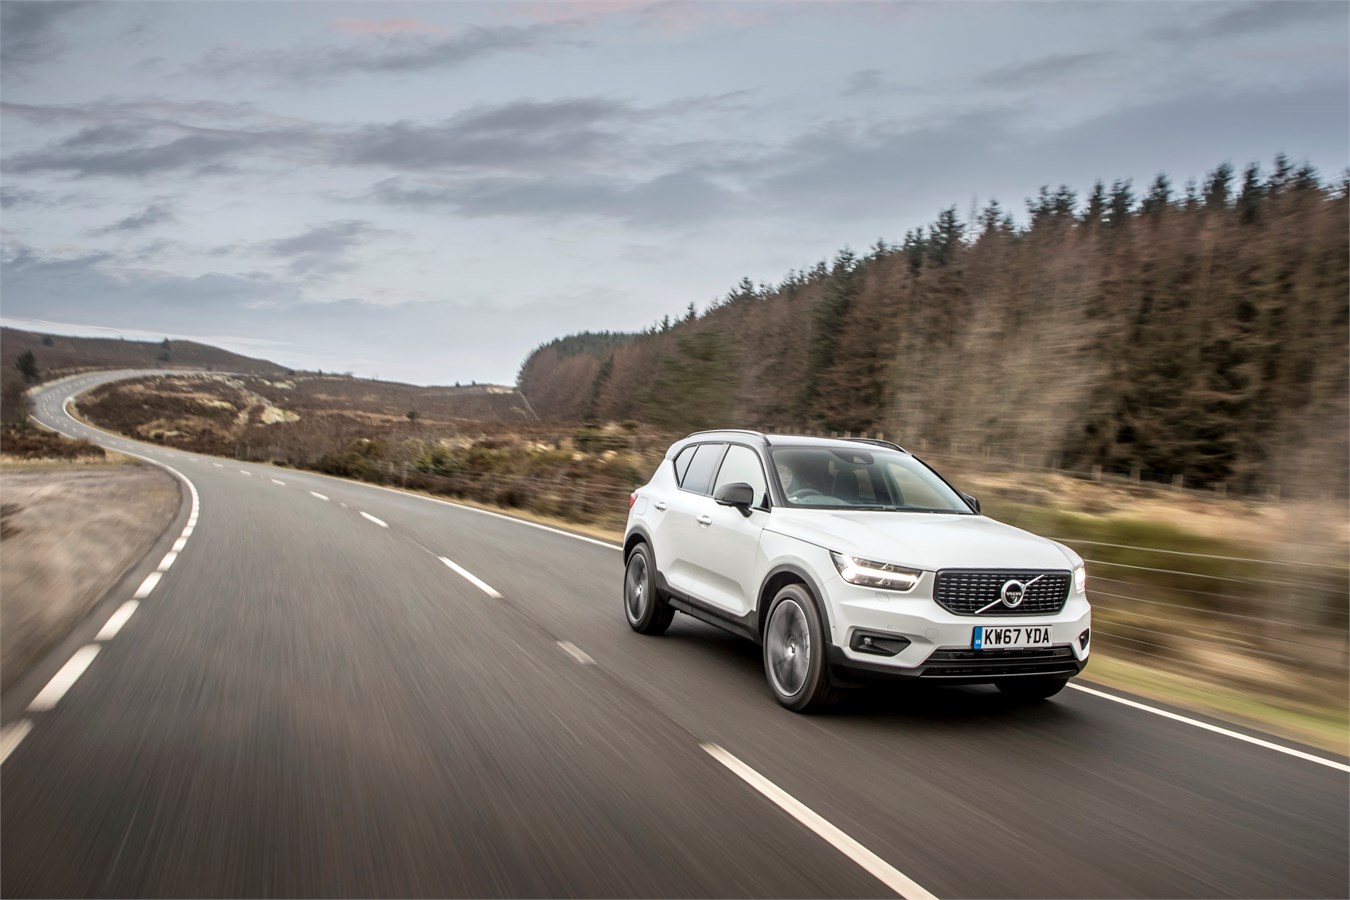 Volvo XC40 crowned What Car? Car of the Year 2018